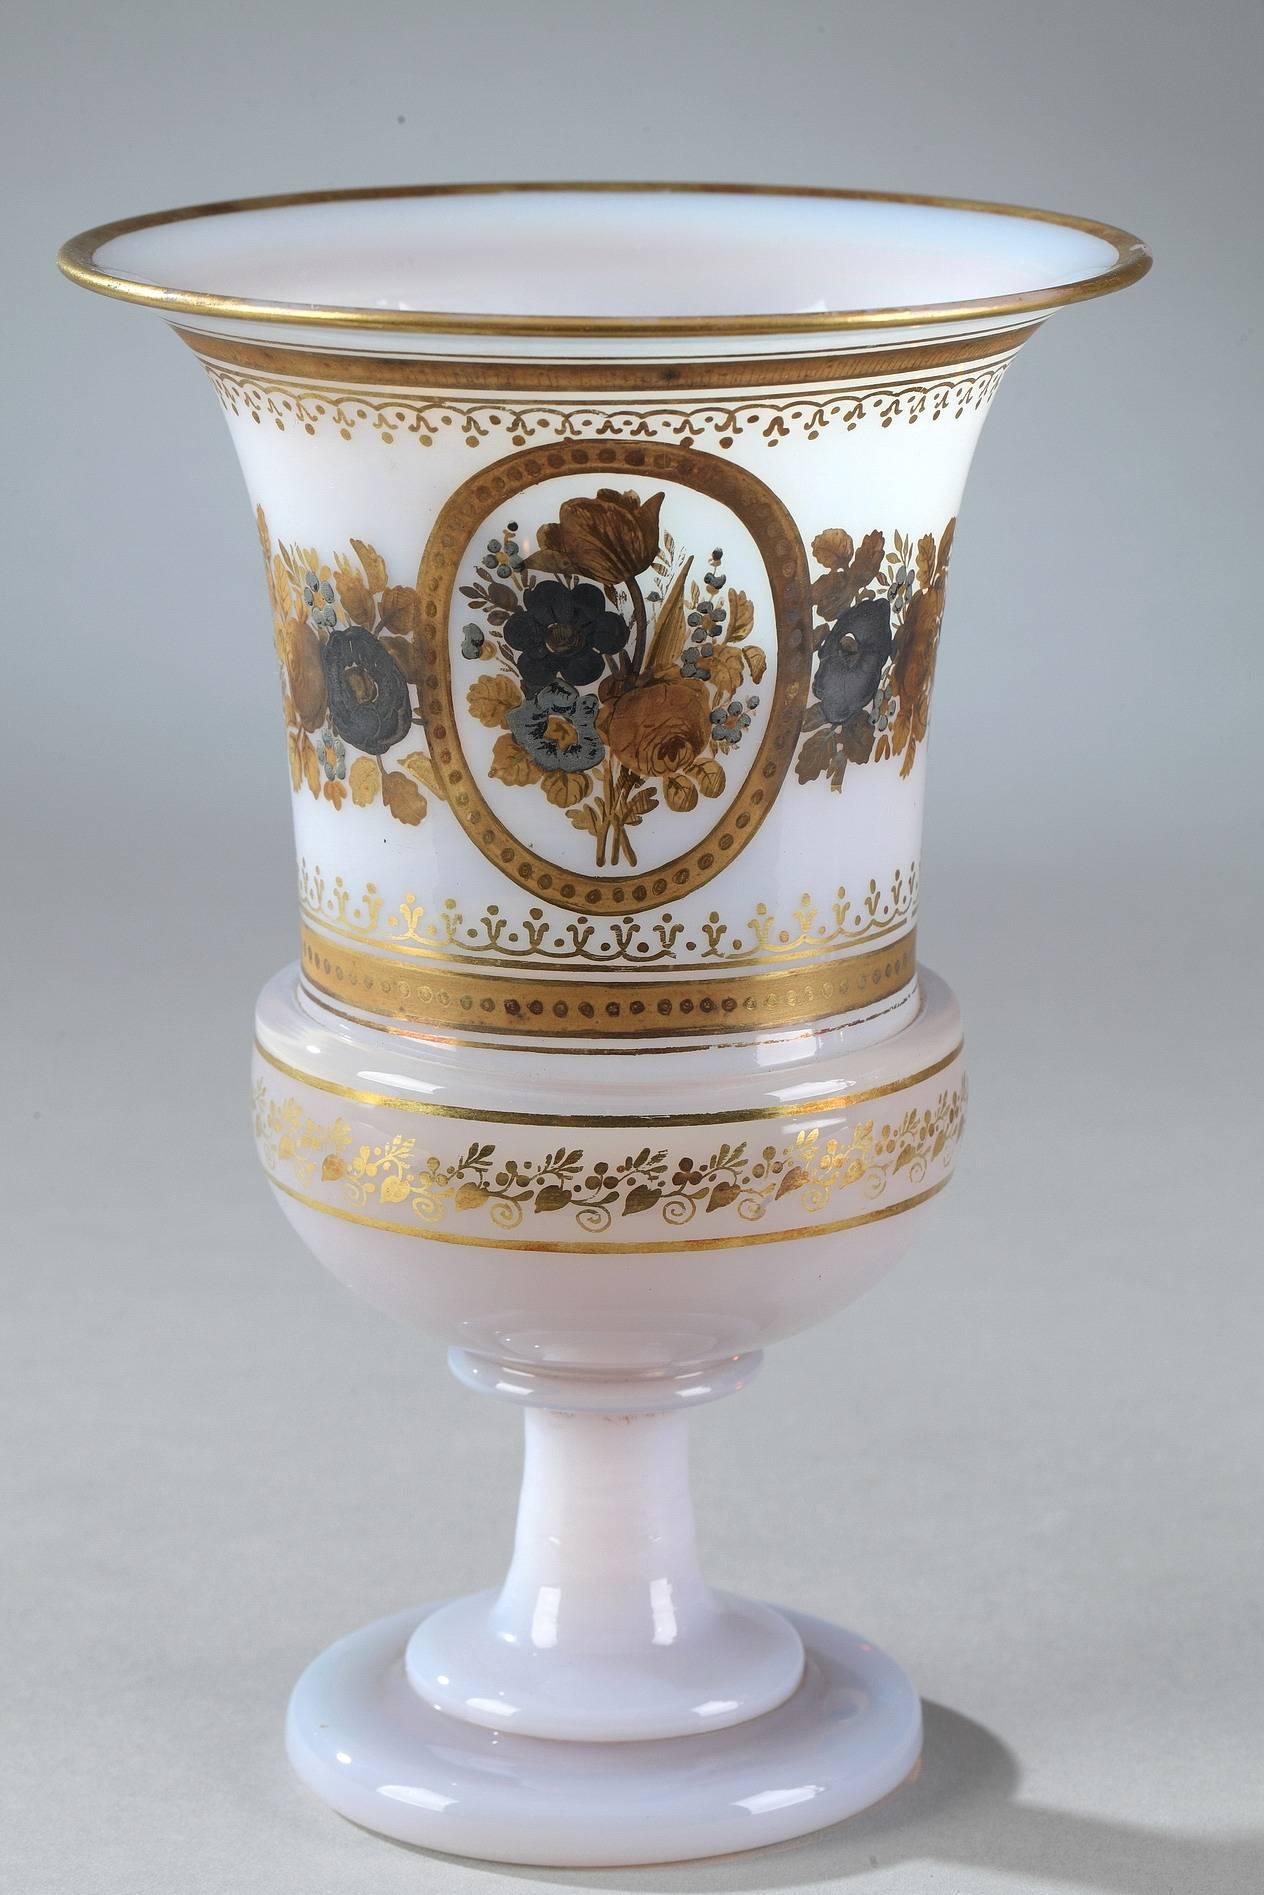 Early 19th century pair of Medici vases in bulle de savon (soap bubble) opaline. The bodies are decorated with two medallions depicting two bouquets of flowers. Golden stripes, branches and floral motifs, gold and a blue wreath of anemones and